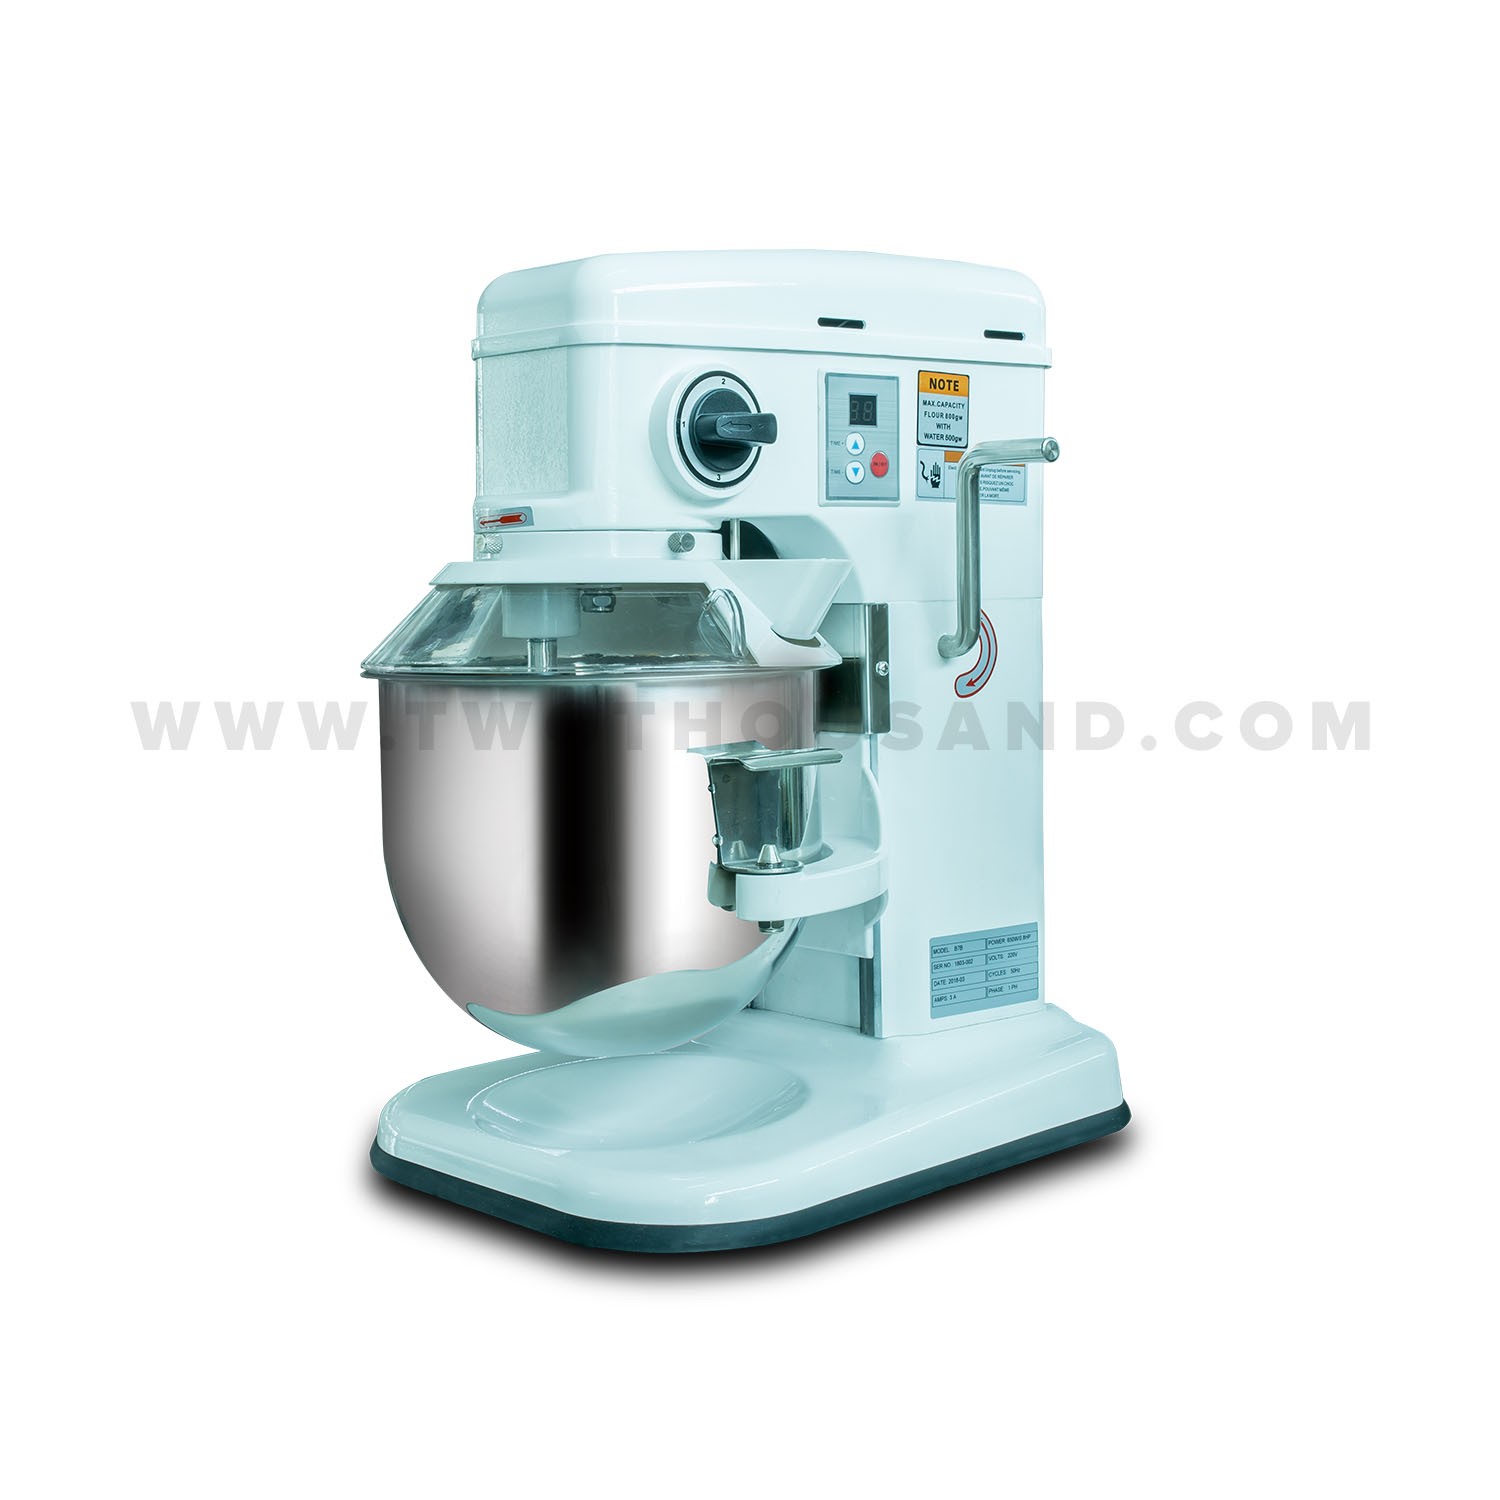 B7B 7L 3 Speed CE Countertop Kitchen Stand Food Baking Mixer for Sale